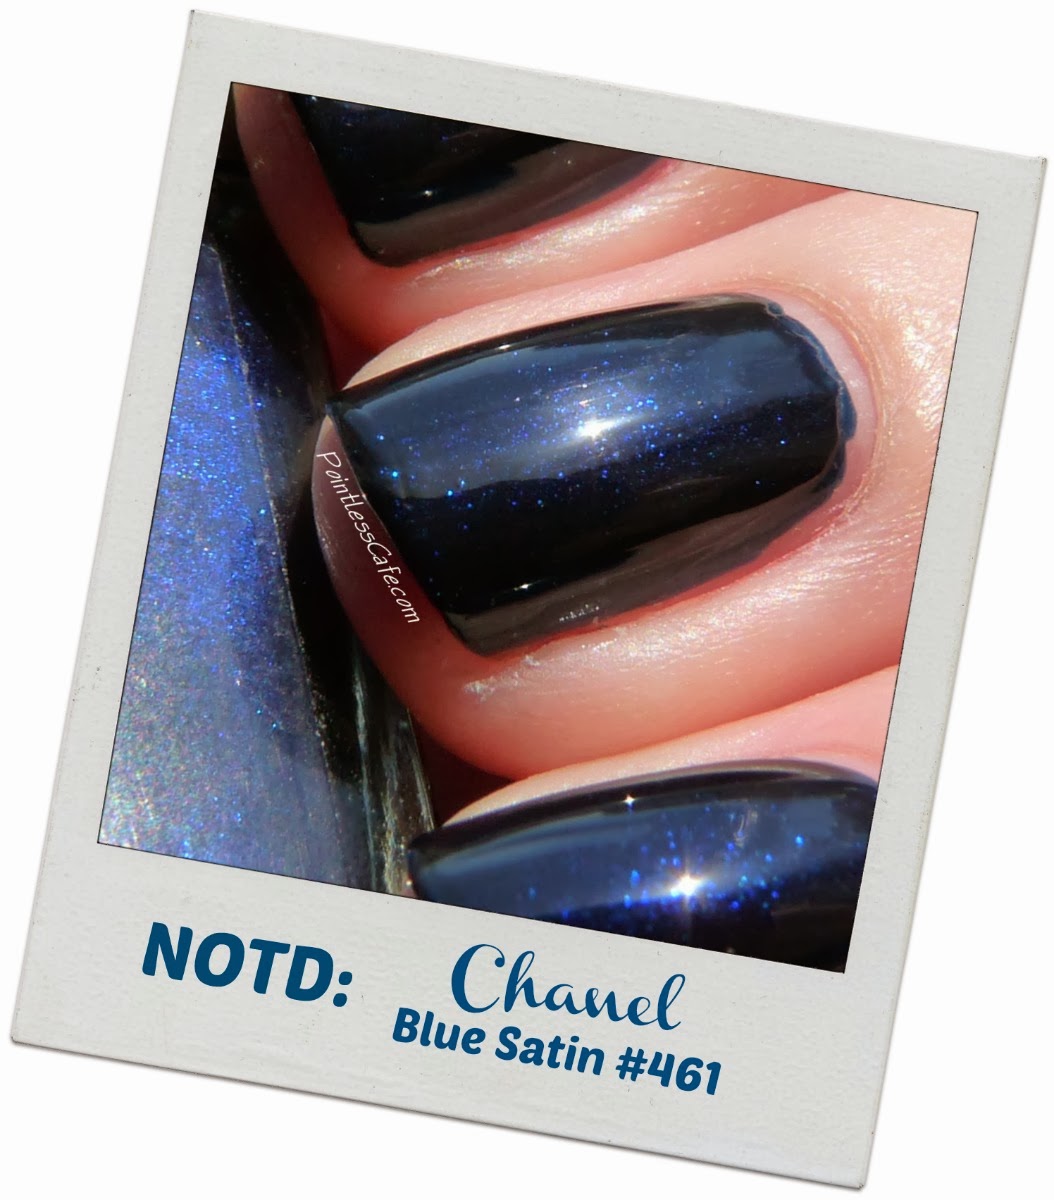 Pointless Cafe: Nail of the Day: Chanel Particulière #505